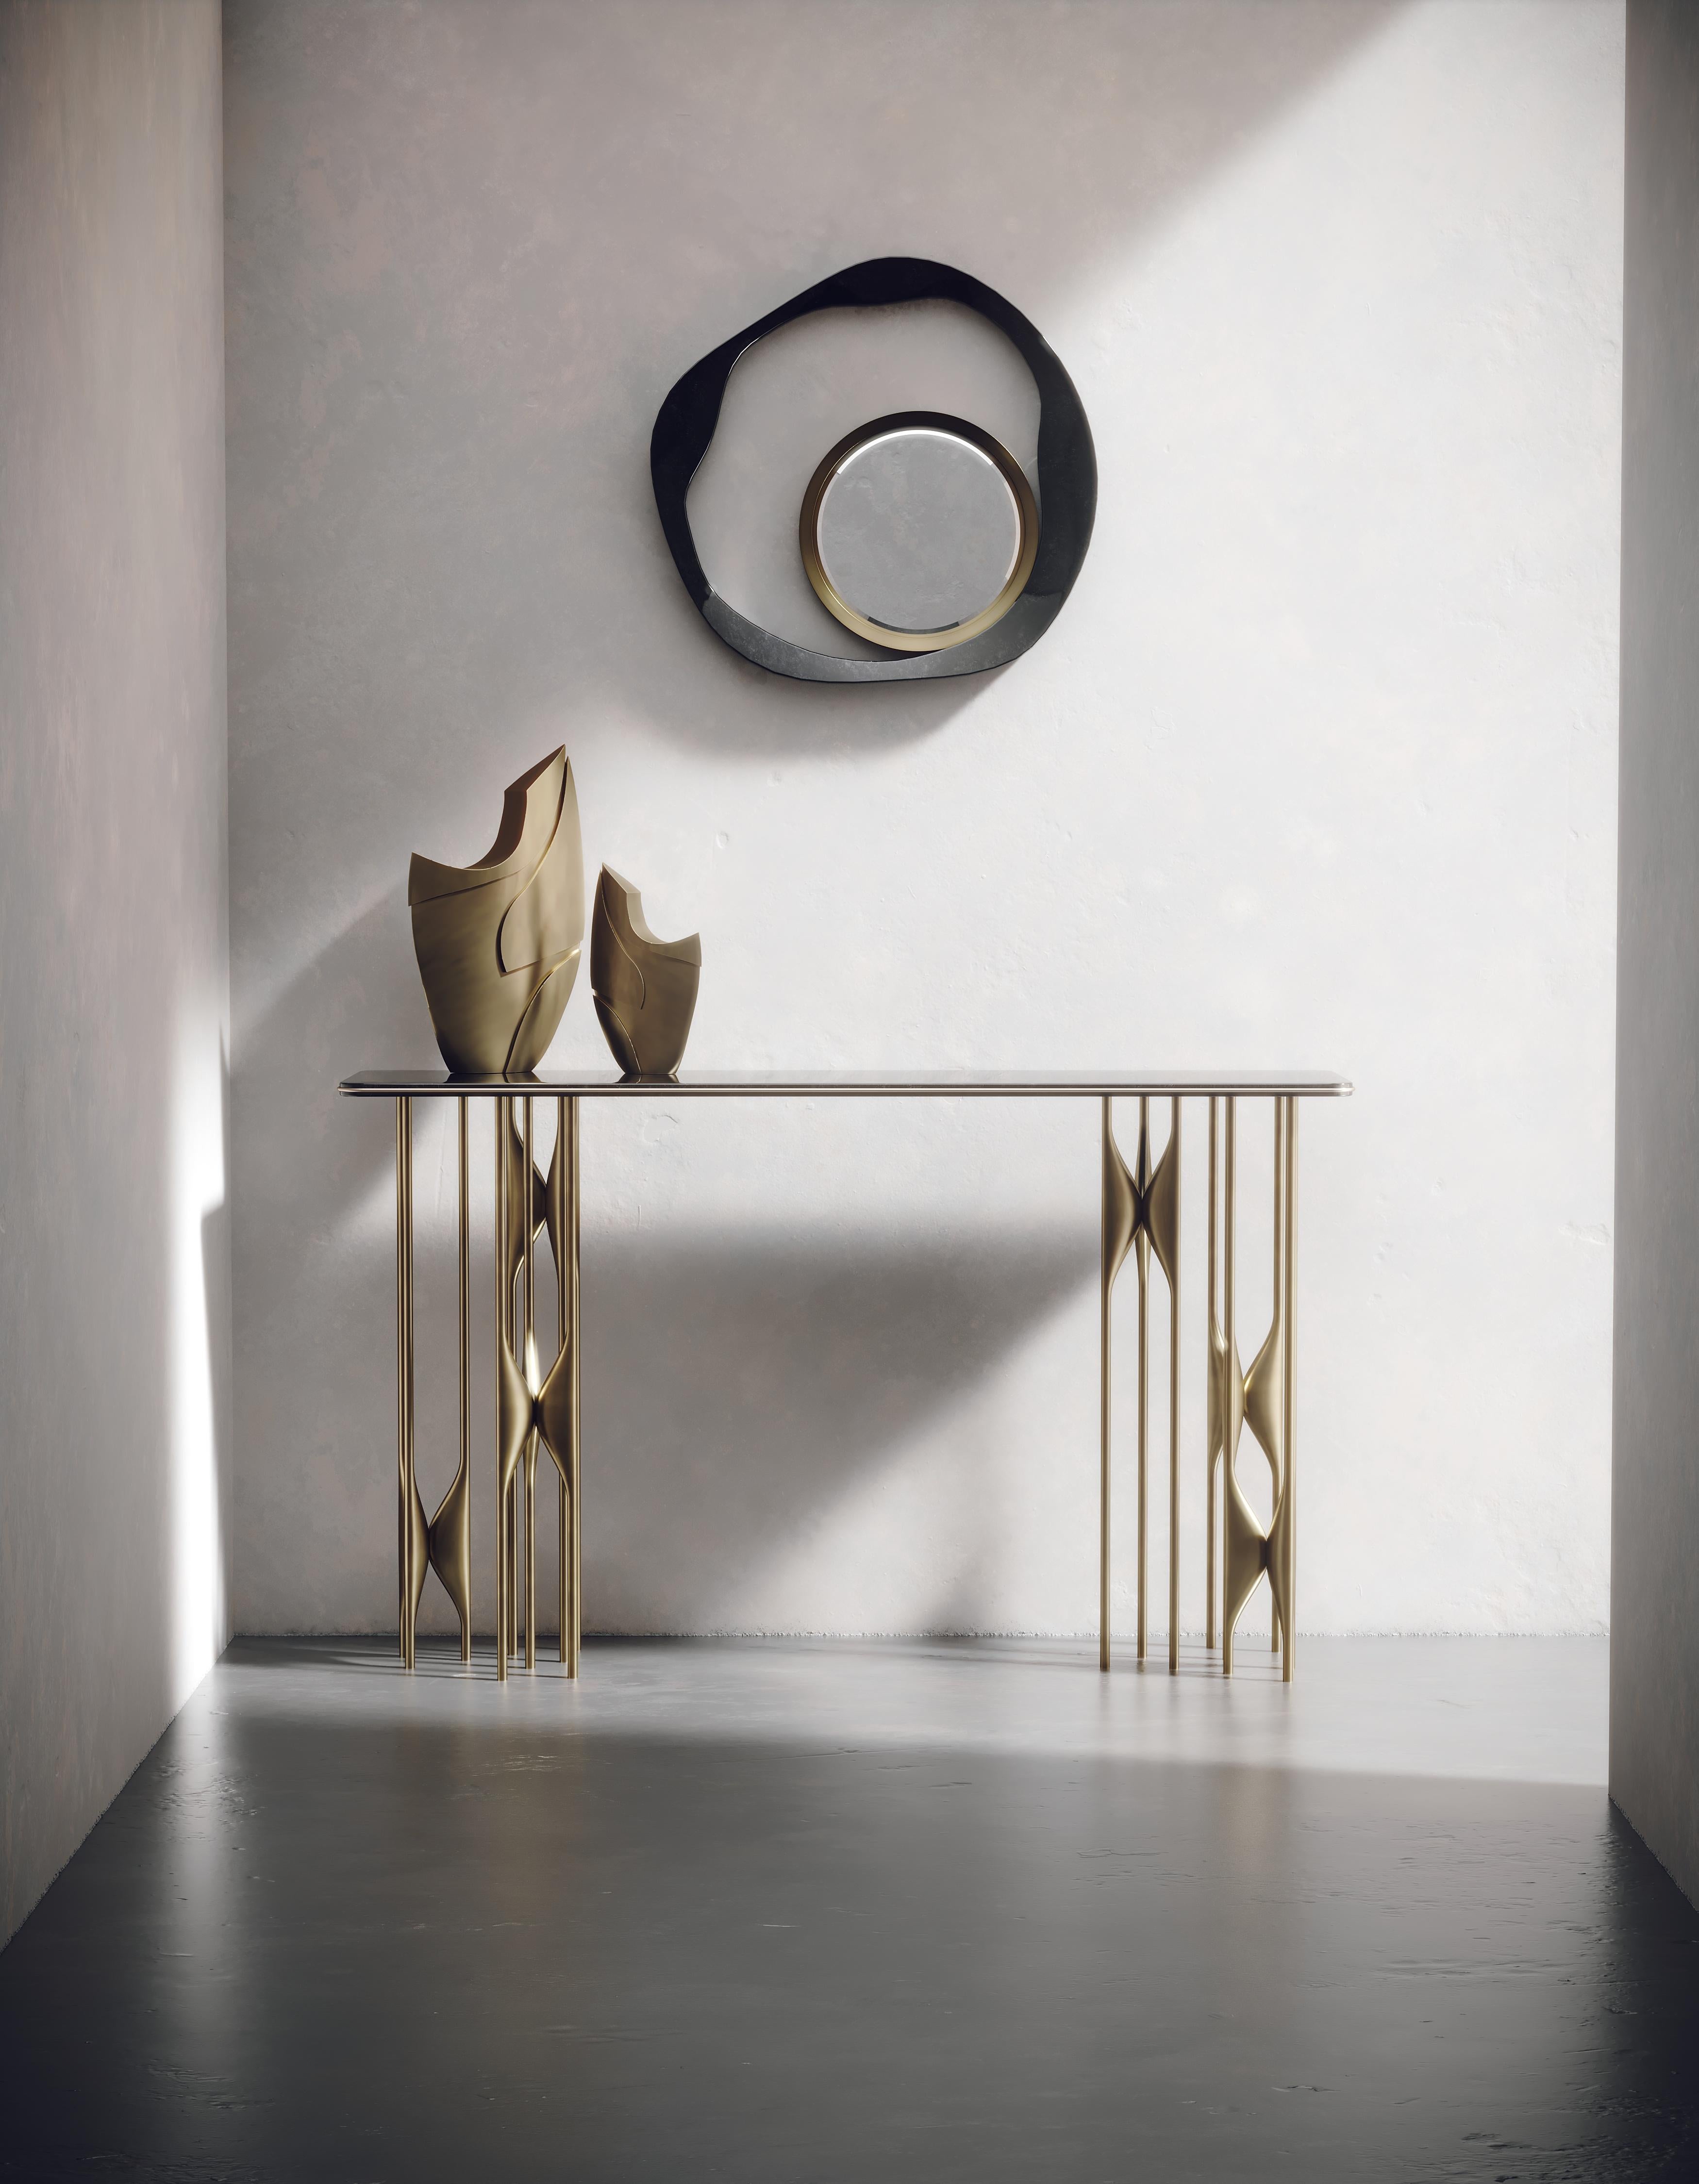 The Plumeria Console by Kifu Paris is a dramatic and sculptural piece. The cream shagreen inlaid top sits on clusters of bronze-patina brass legs that are conceptually inspired by bird feathers floating on top of a lake. The border of the top is